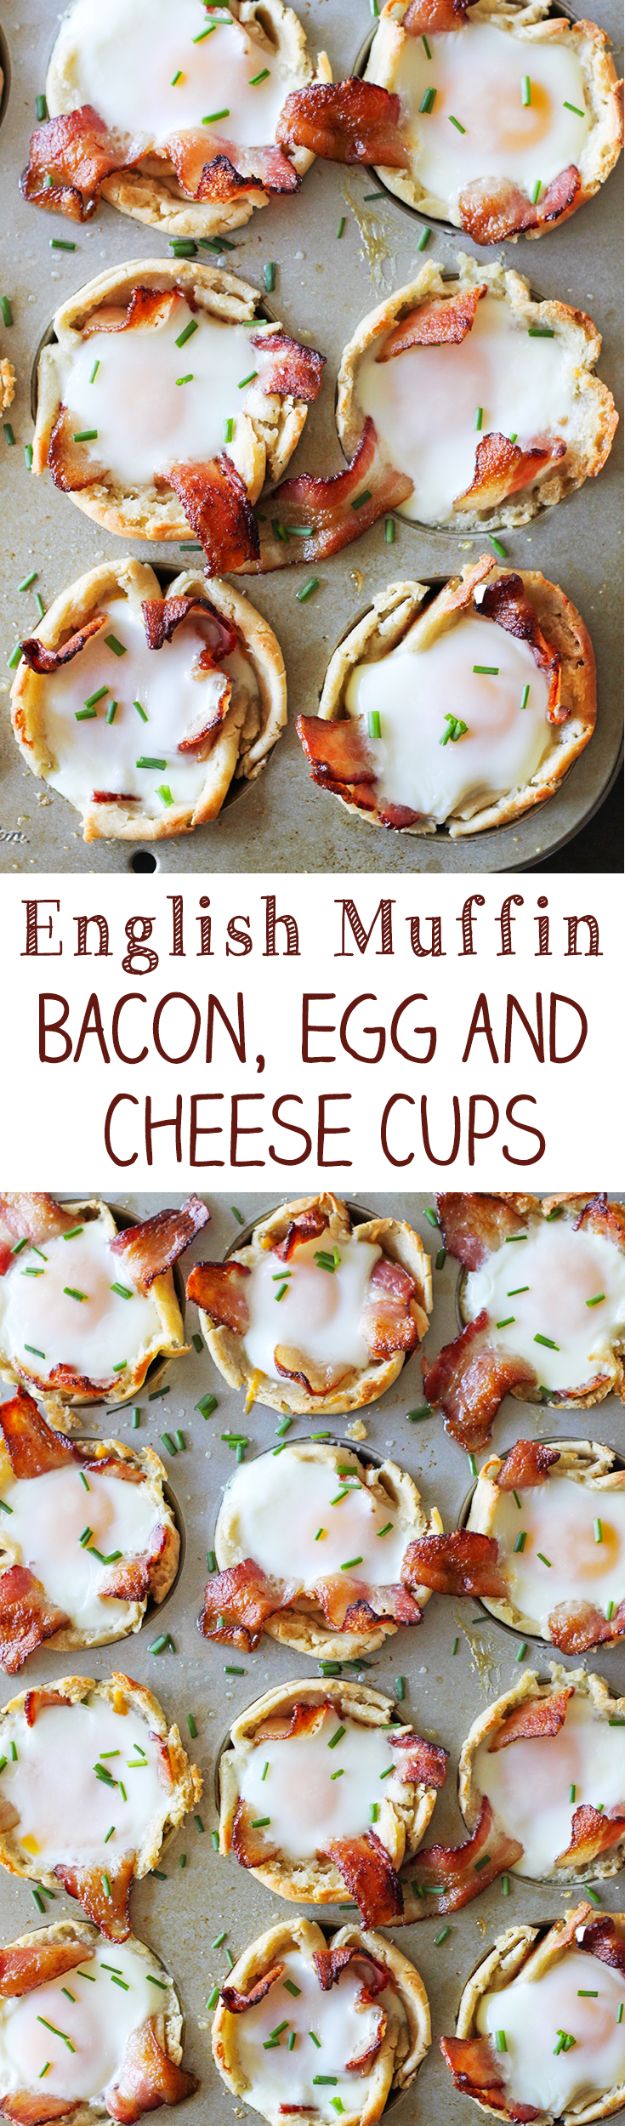 Best Recipes for the Cheese Lover - English Muffin Bacon Egg and Cheese Cups - Easy Recipe Ideas With Cheese - Homemade Appetizers, Dips, Dinners, Snacks, Pasta Dishes, Healthy Lunches and Soups Made With Your Favorite Cheeses - Ricotta, Cheddar, Swiss, Parmesan, Goat Chevre, Mozzarella and Feta Ideas - Grilled, Healthy, Vegan and Vegetarian #cheeserecipes #recipes #recipeideas #cheese #cheeserecipe http://diyjoy.com/best-recipes-cheese-lover